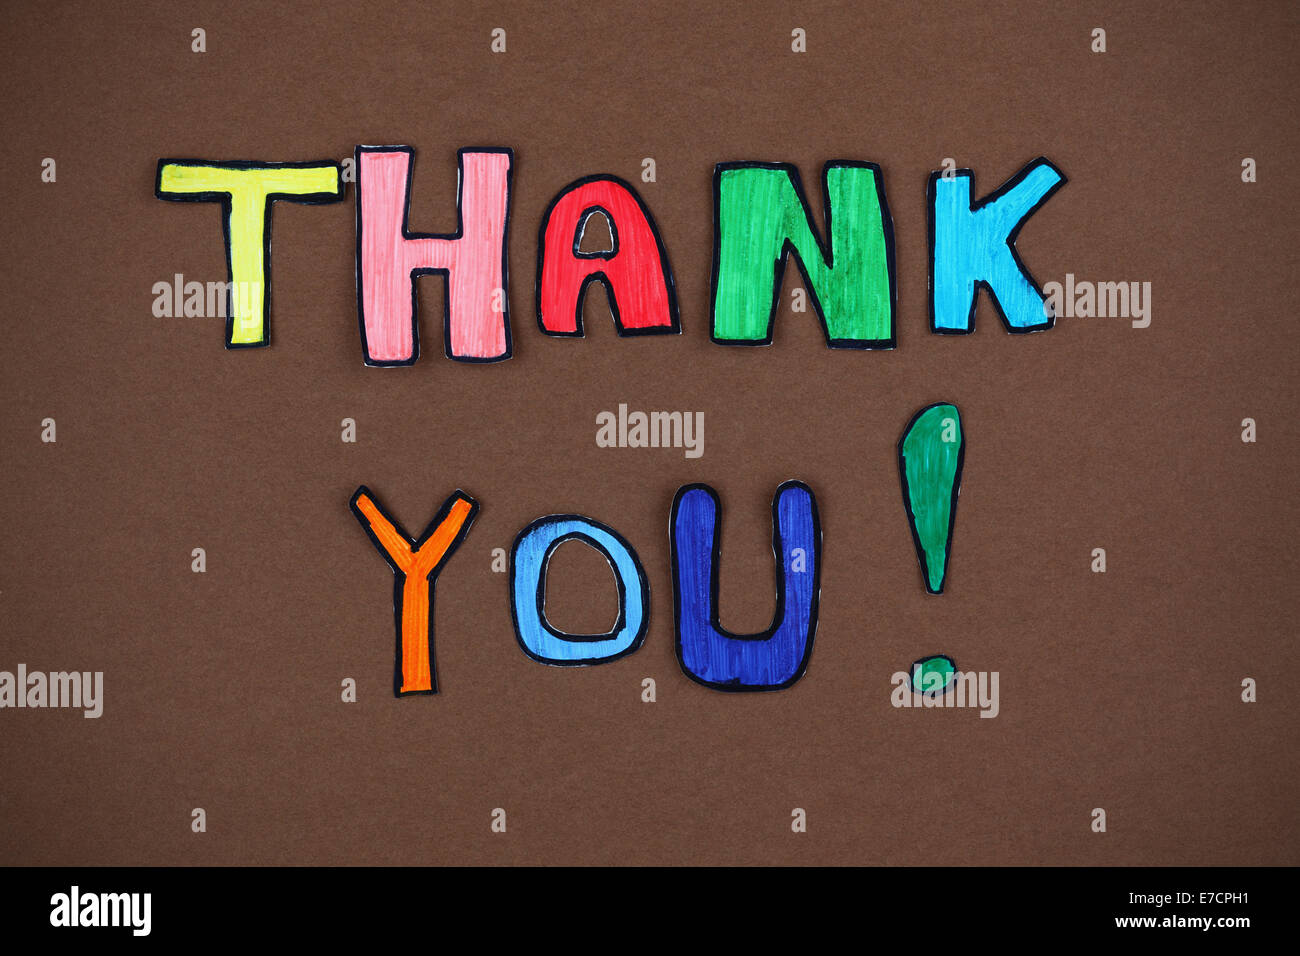 Colorful paper cut out words 'Thank you'. Stock Photo